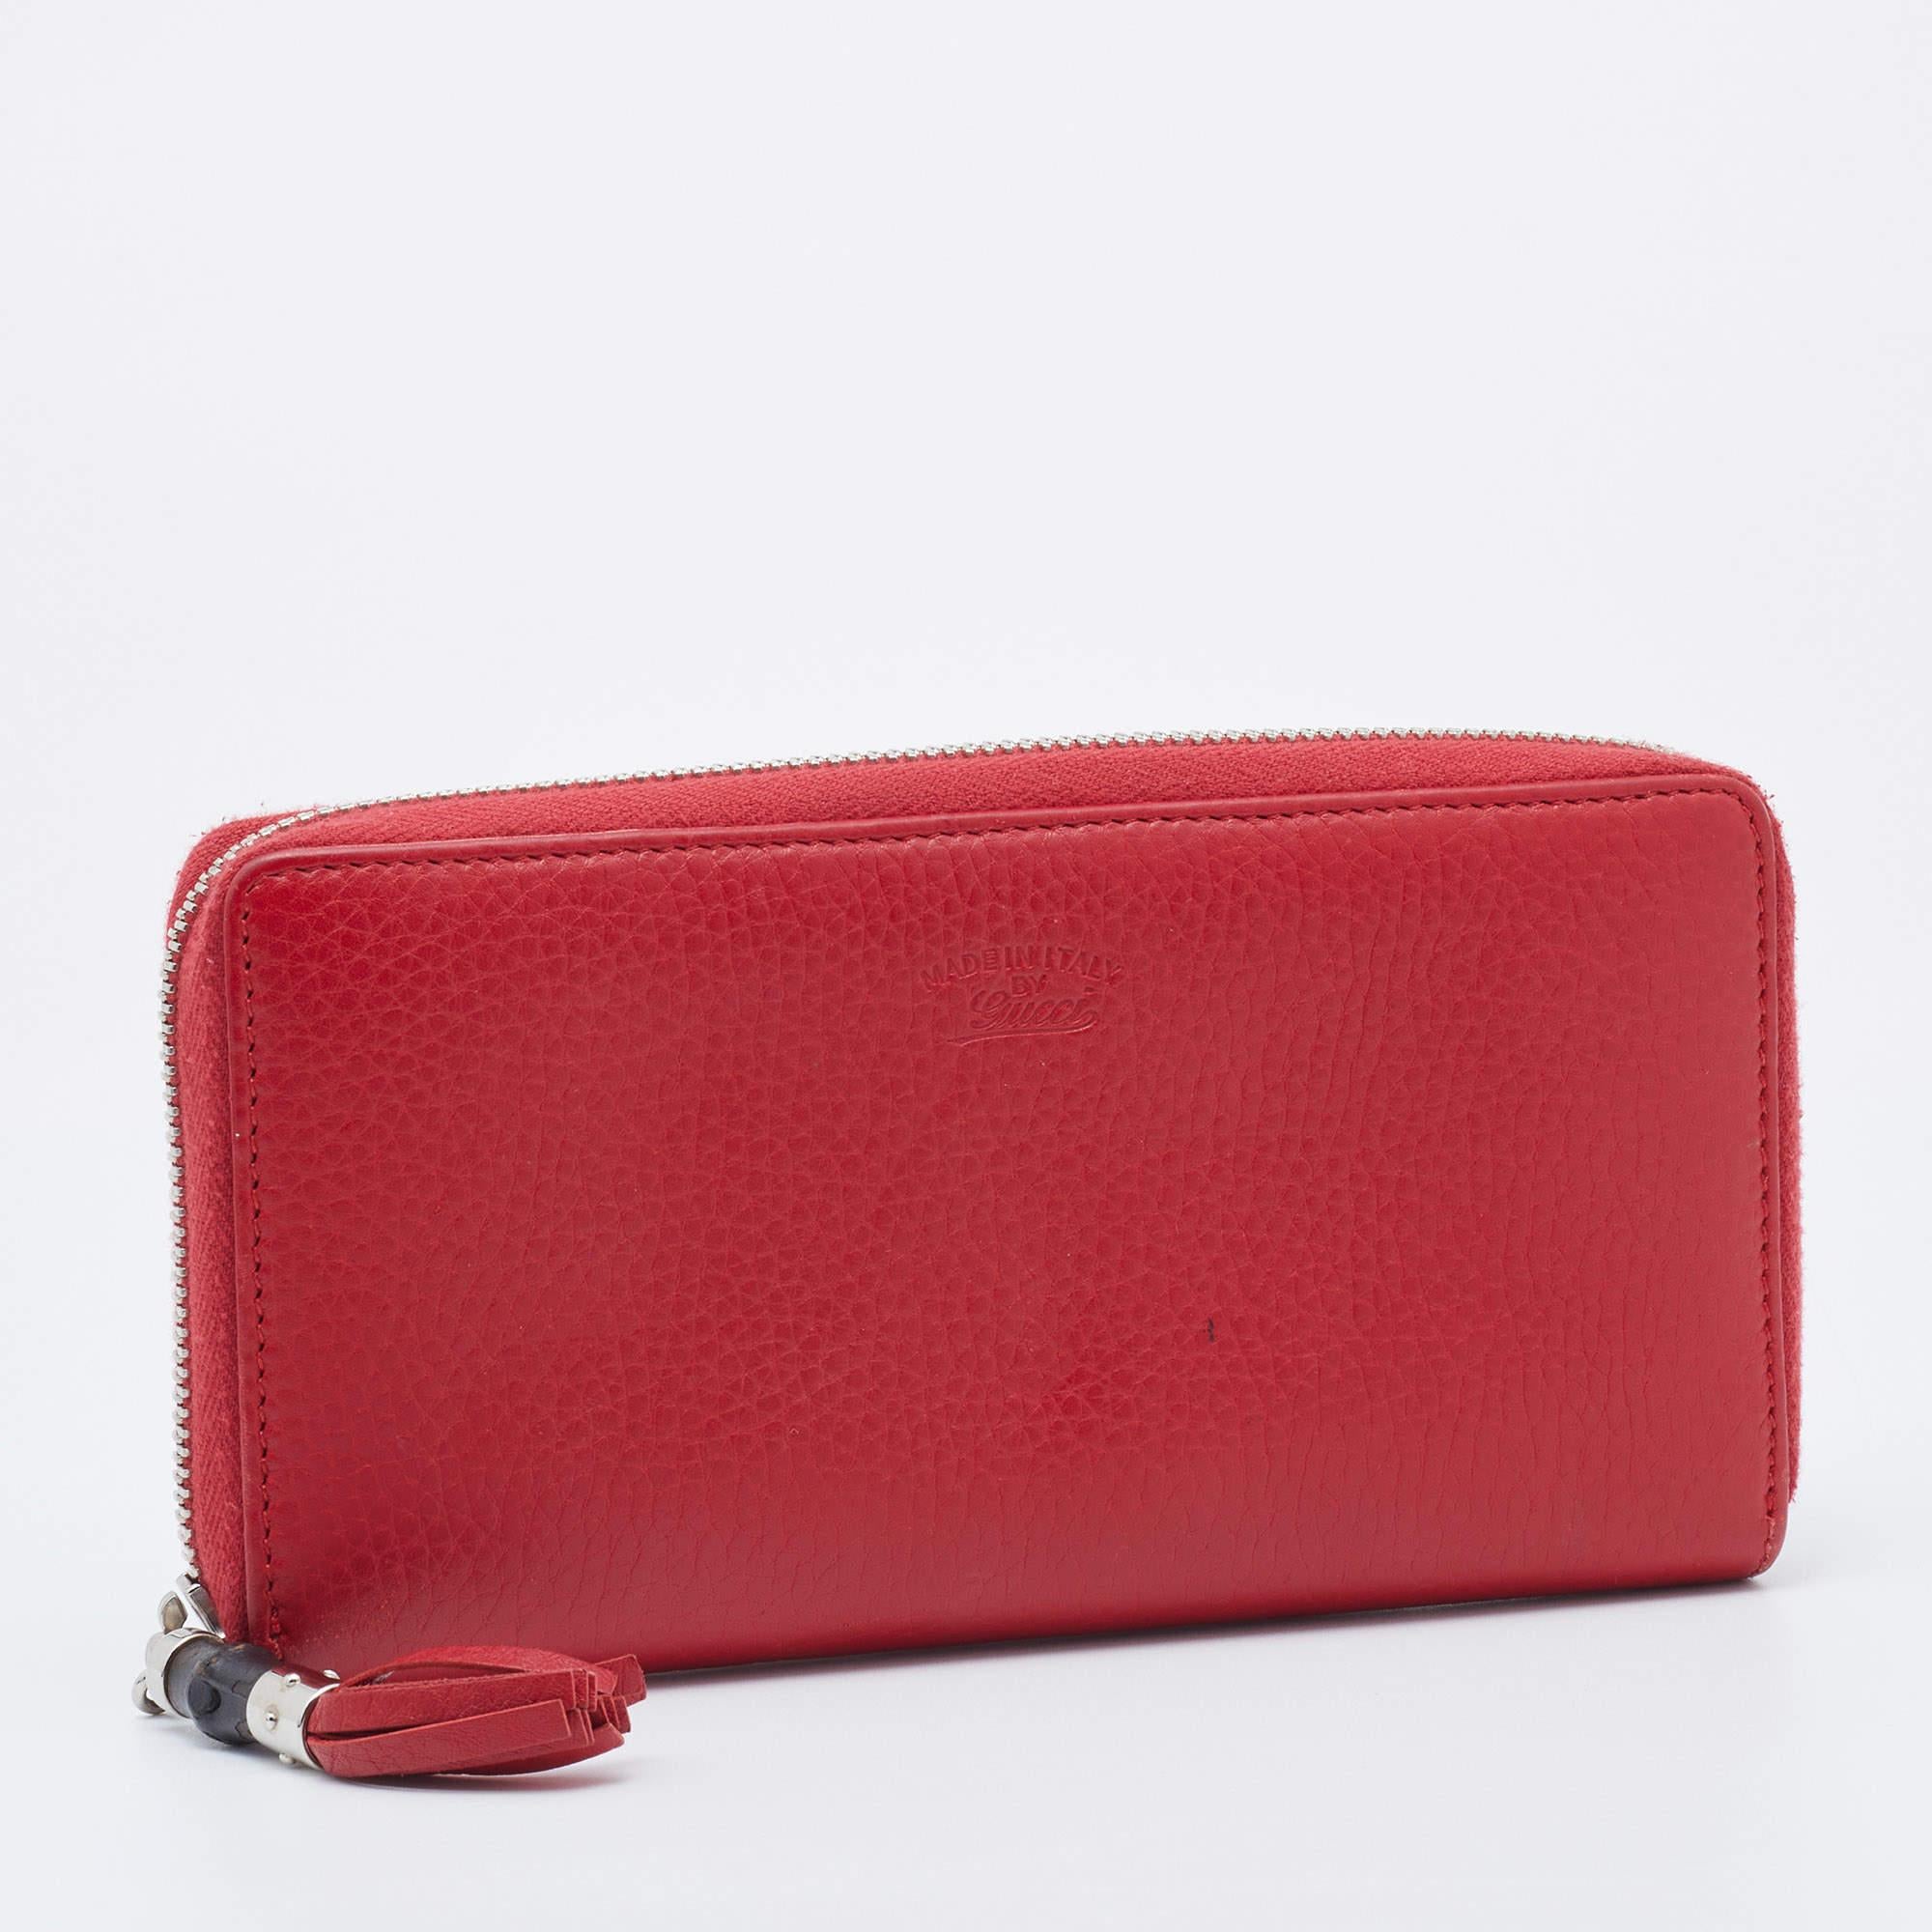 Keep it classy and chic with this minimally designed Gucci wallet. Designed in a red shade, it is crafted from leather, and it is adorned with silver-tone accents. The top zipper closure is equipped with a bamboo tassel slider and secures its